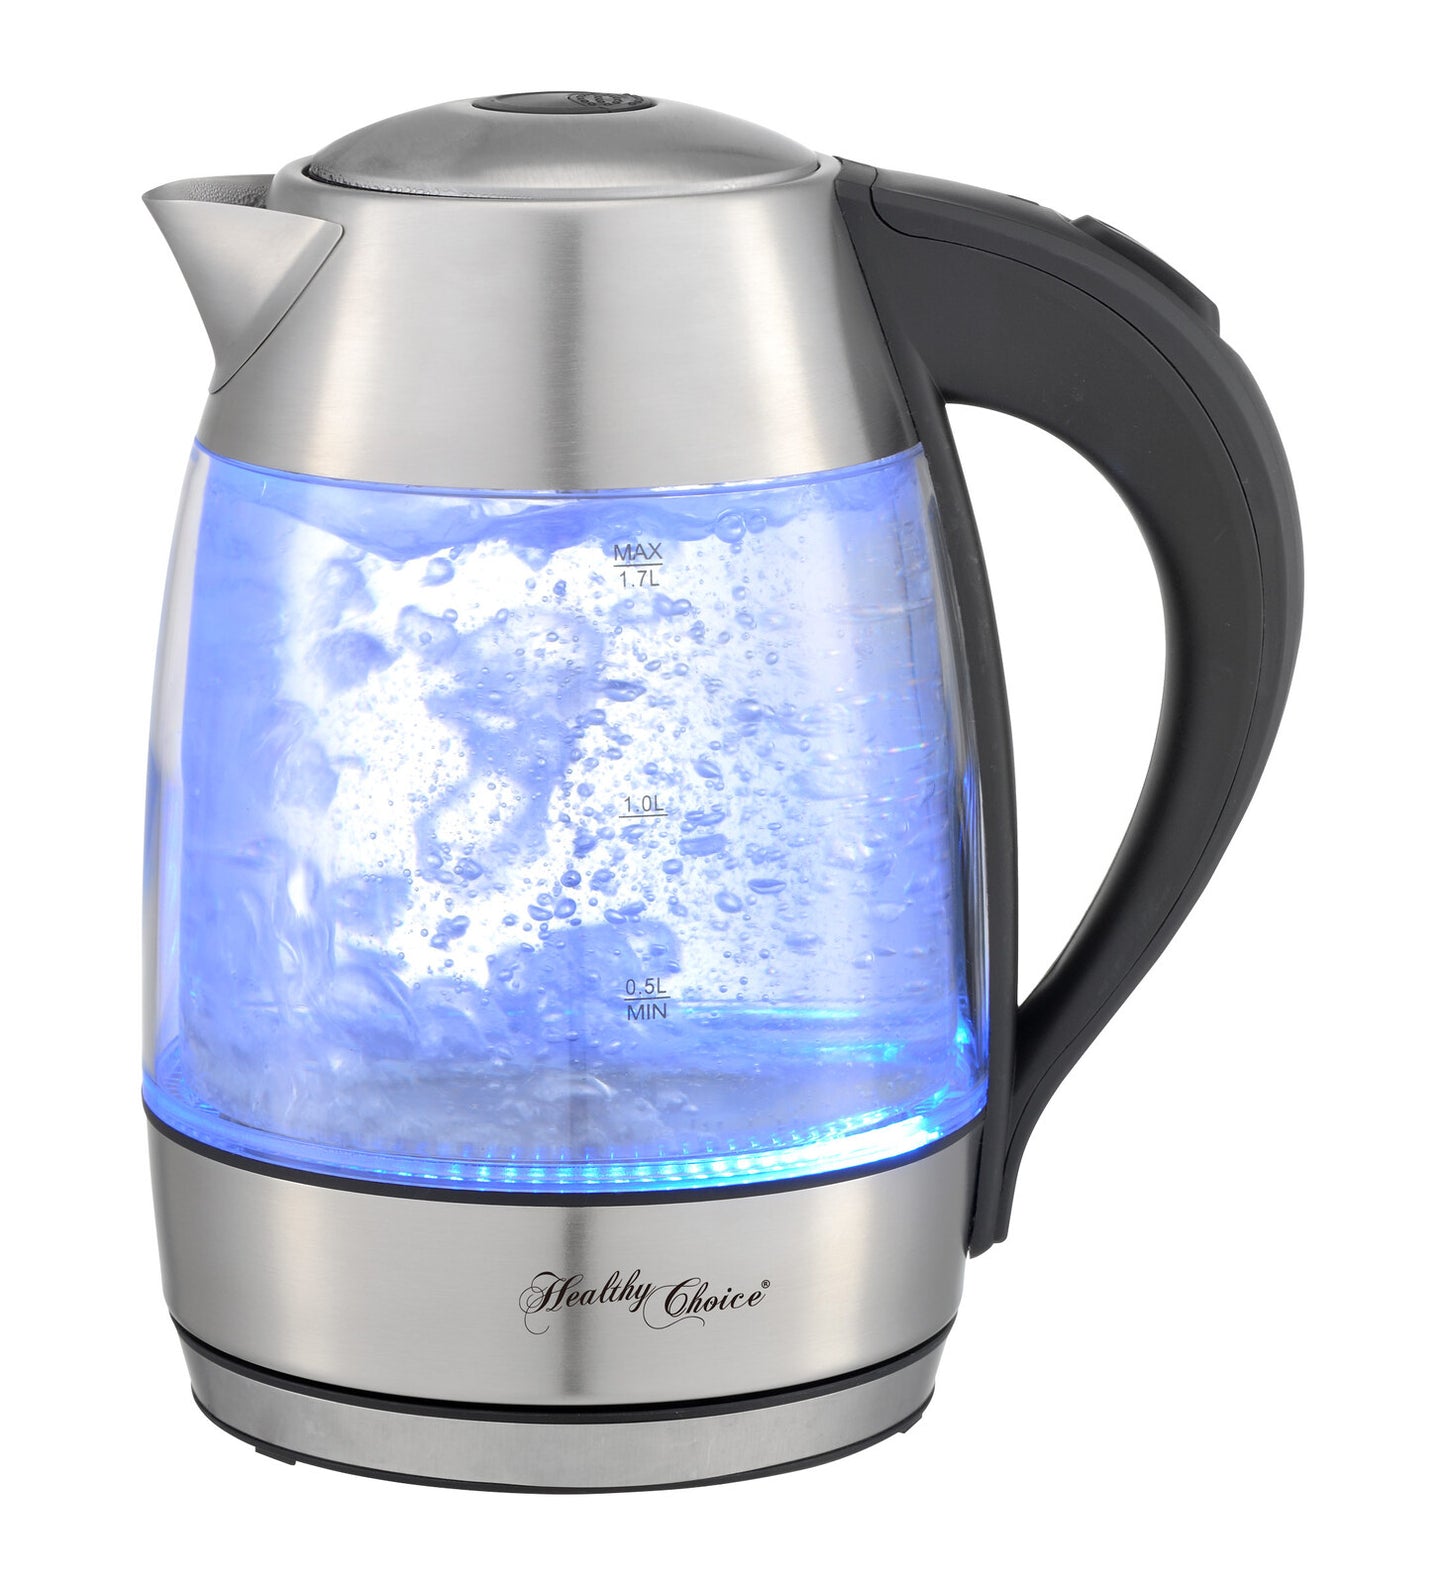 Healthy Choice 1.7 Litre Glass Kettle with 360 degrees Rotational Base